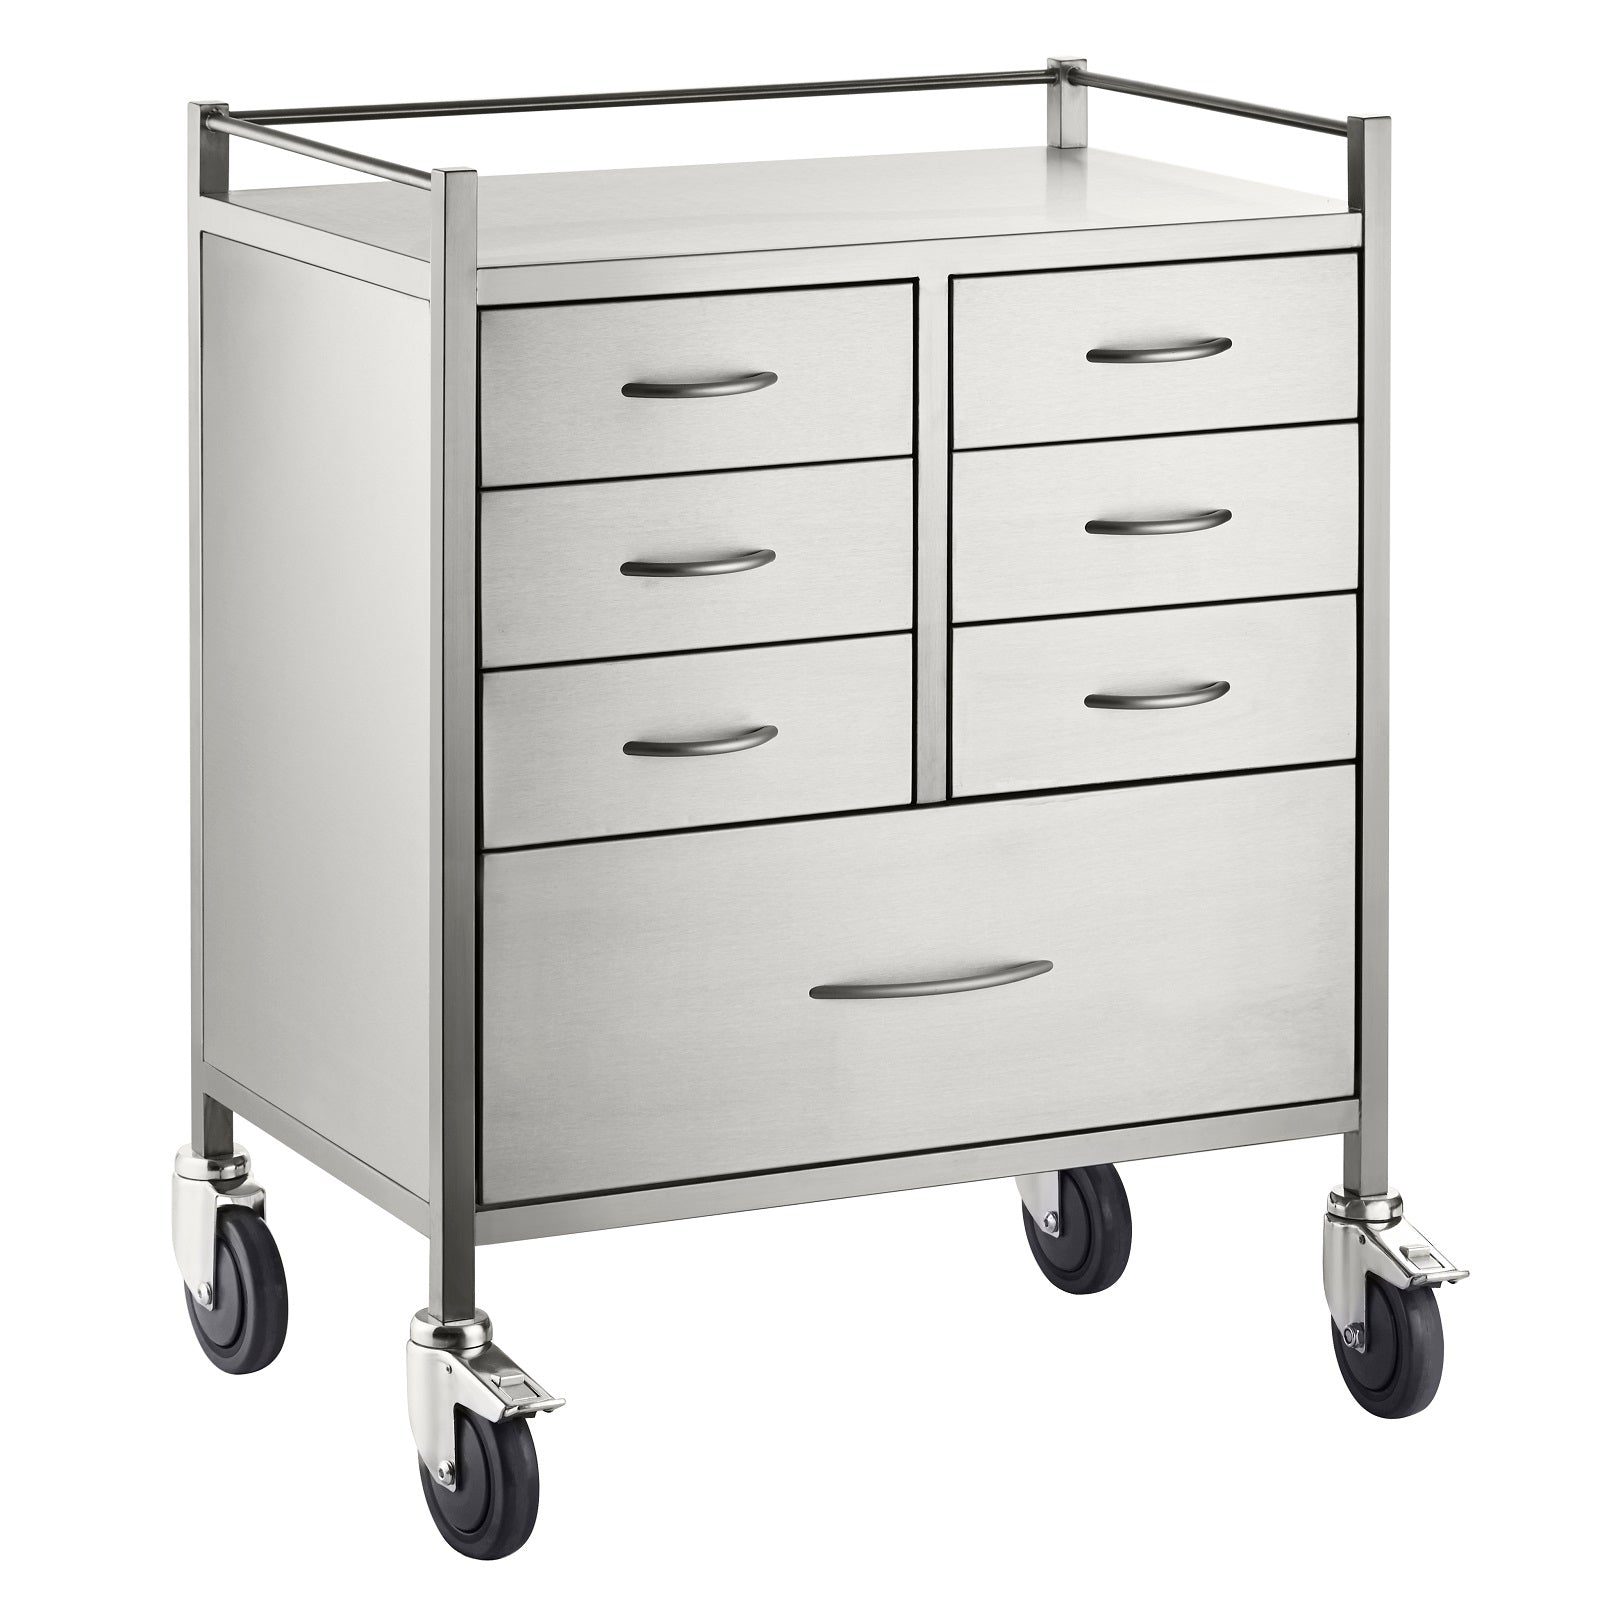 A strong high quality seven drawer resuscitation trolley with rails on top and lockable castors for safety.